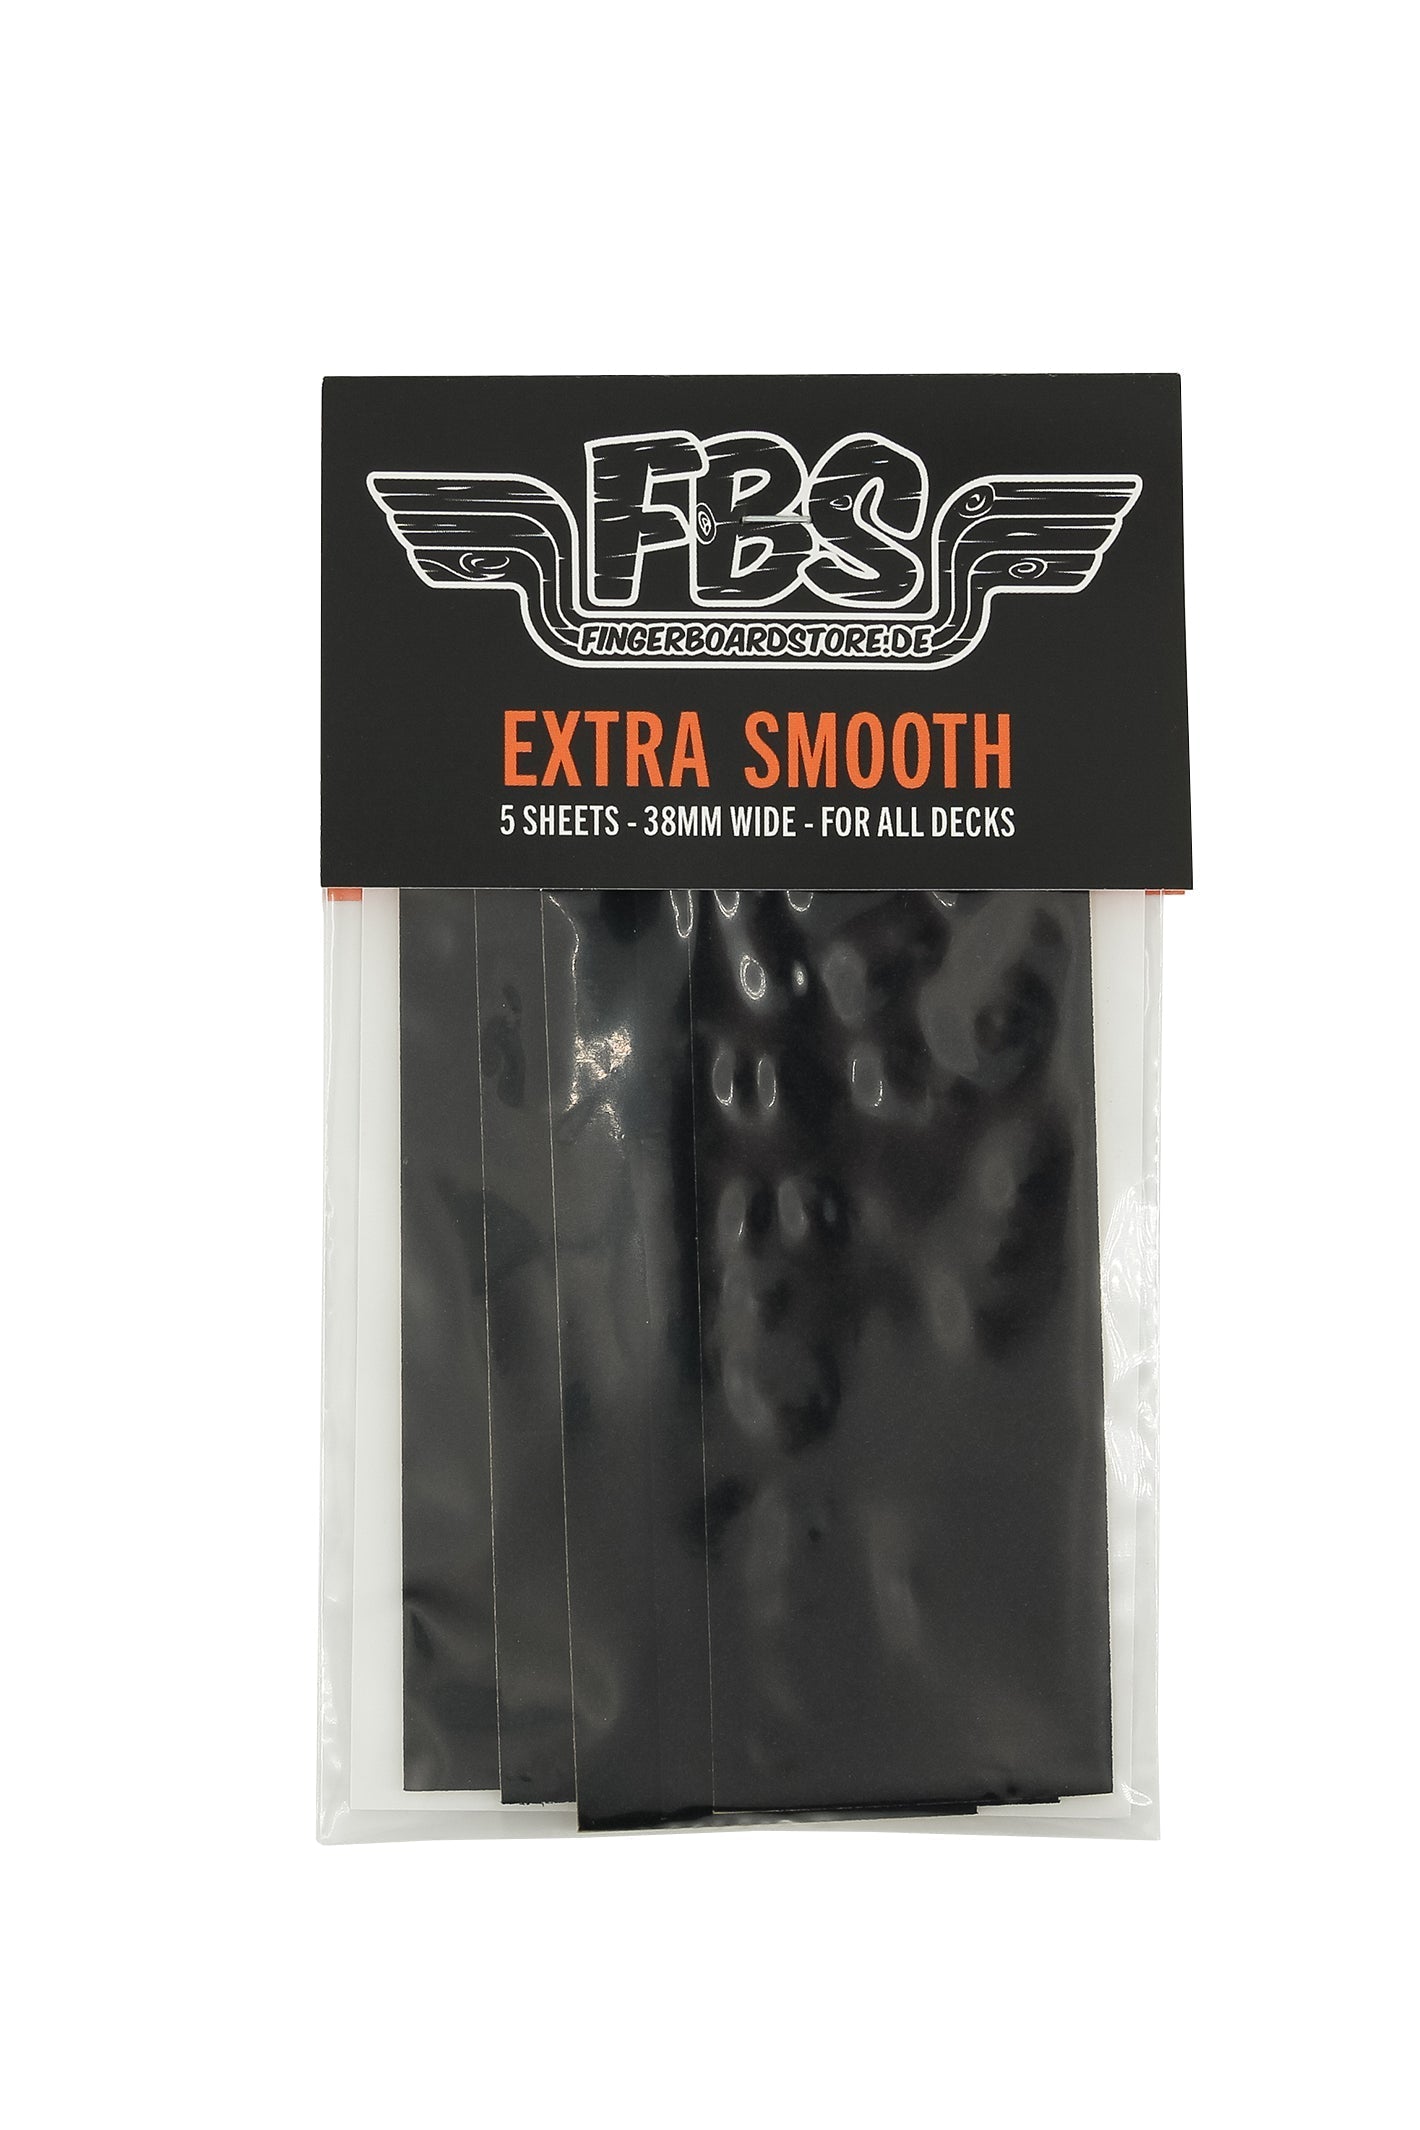 FBS Extra Smooth (10 packs)